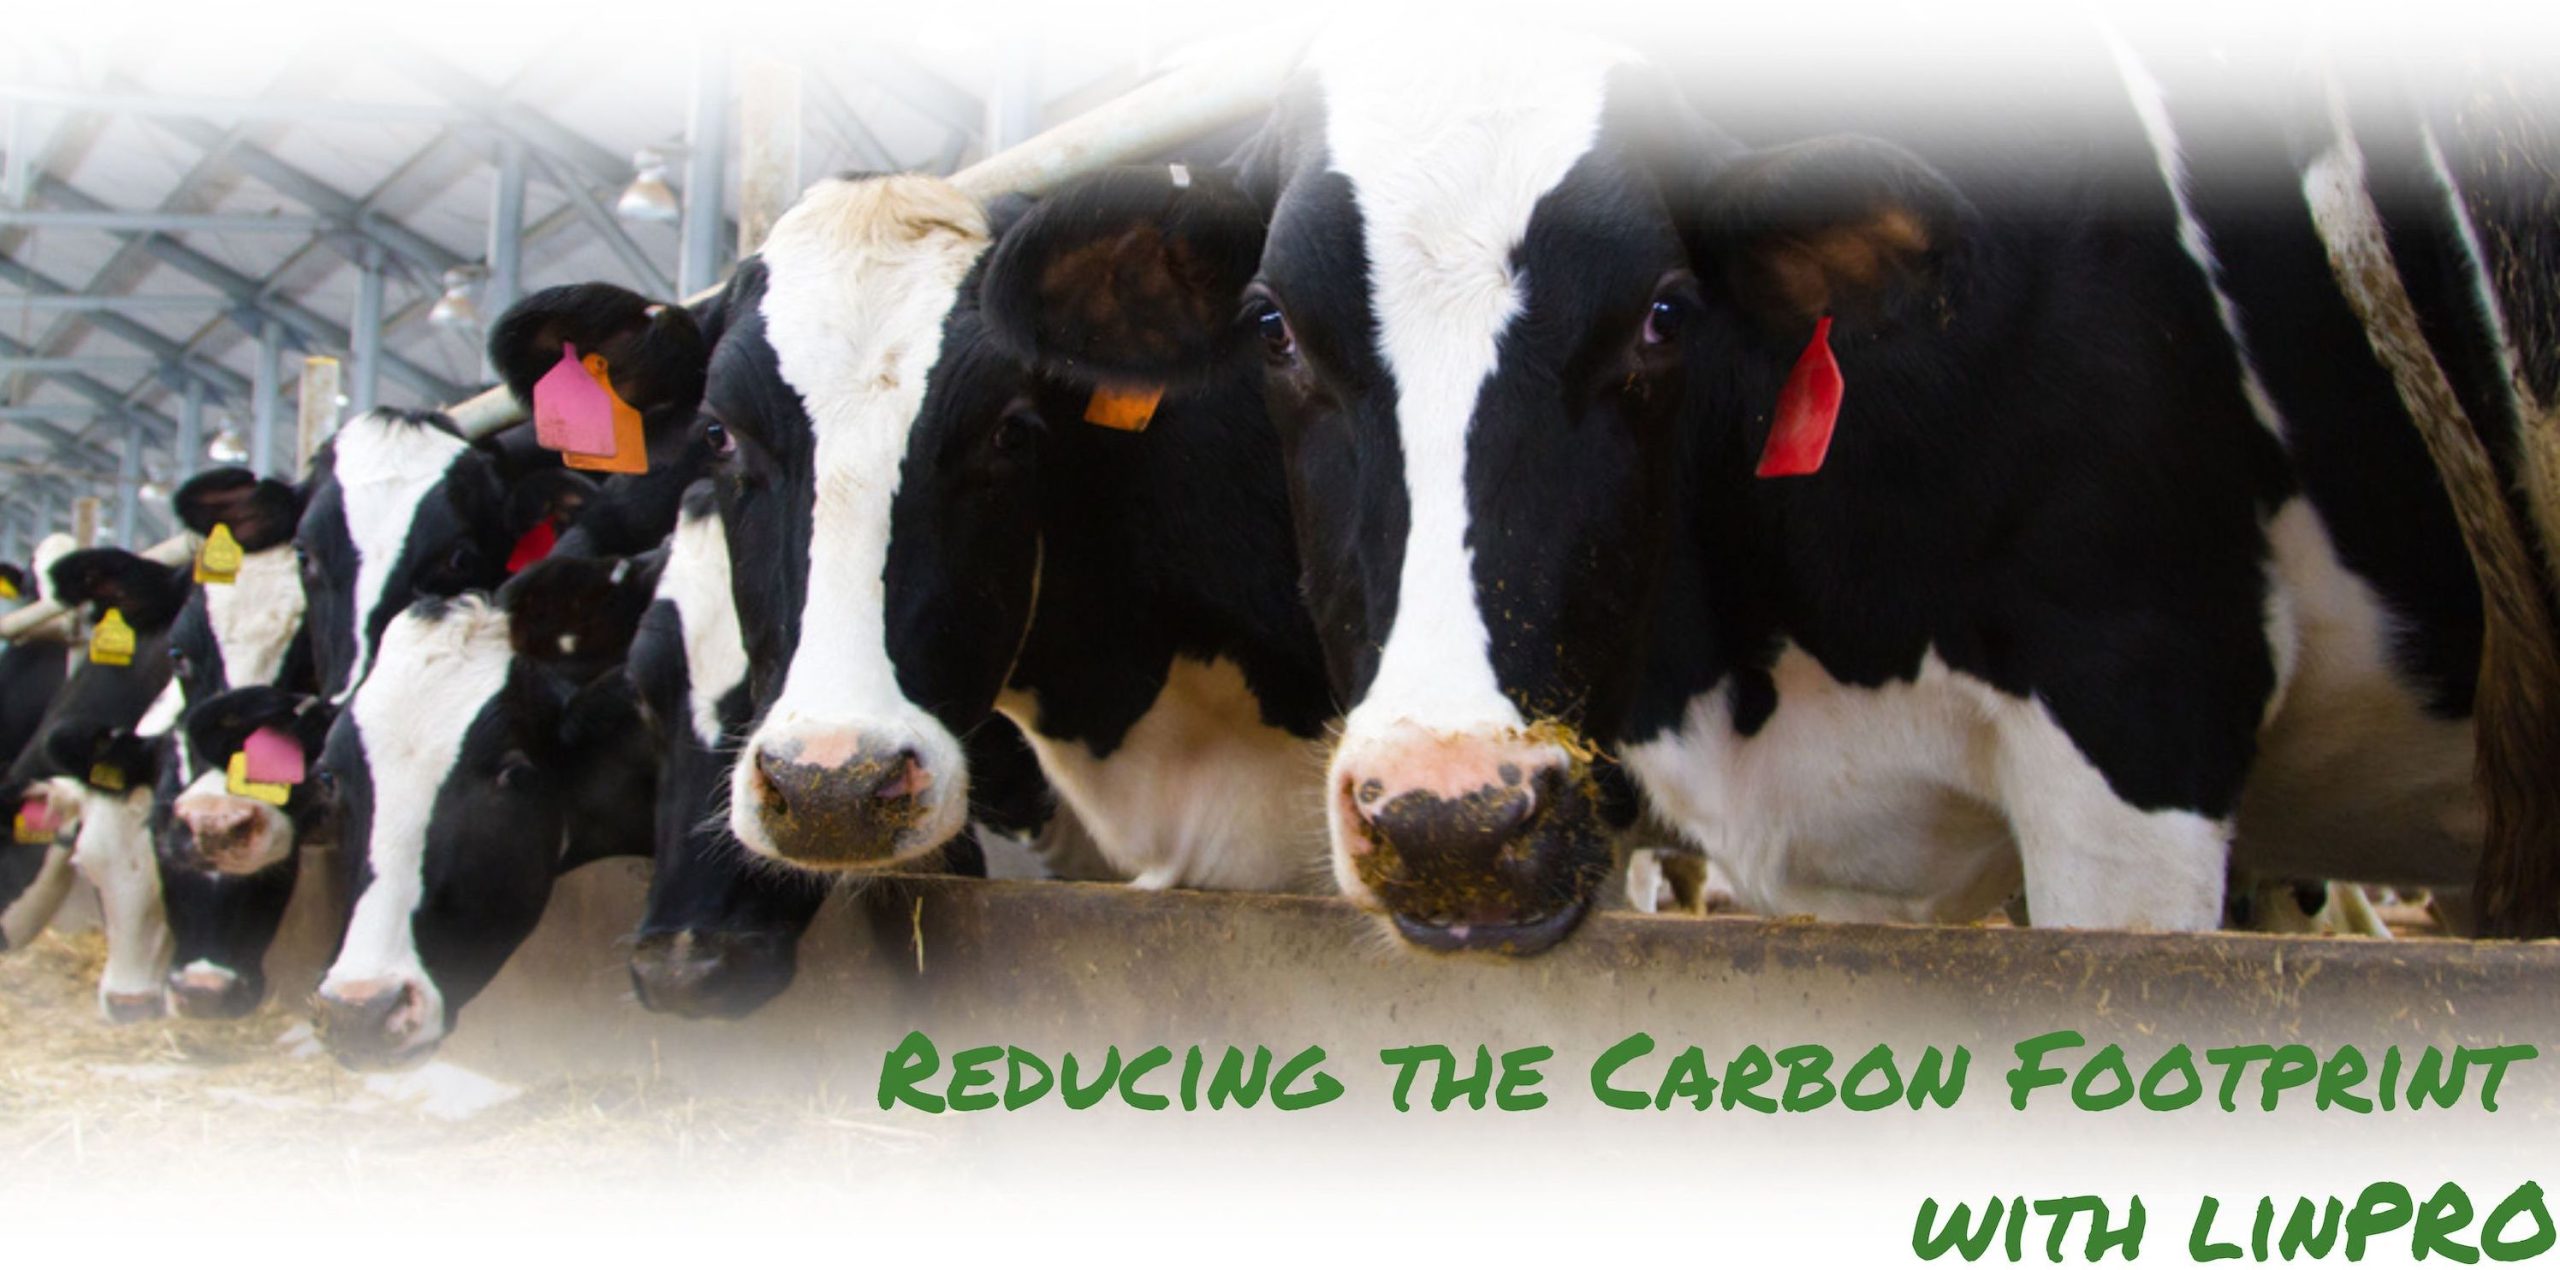 reducing-the-carbon-footprint-banner-scaled